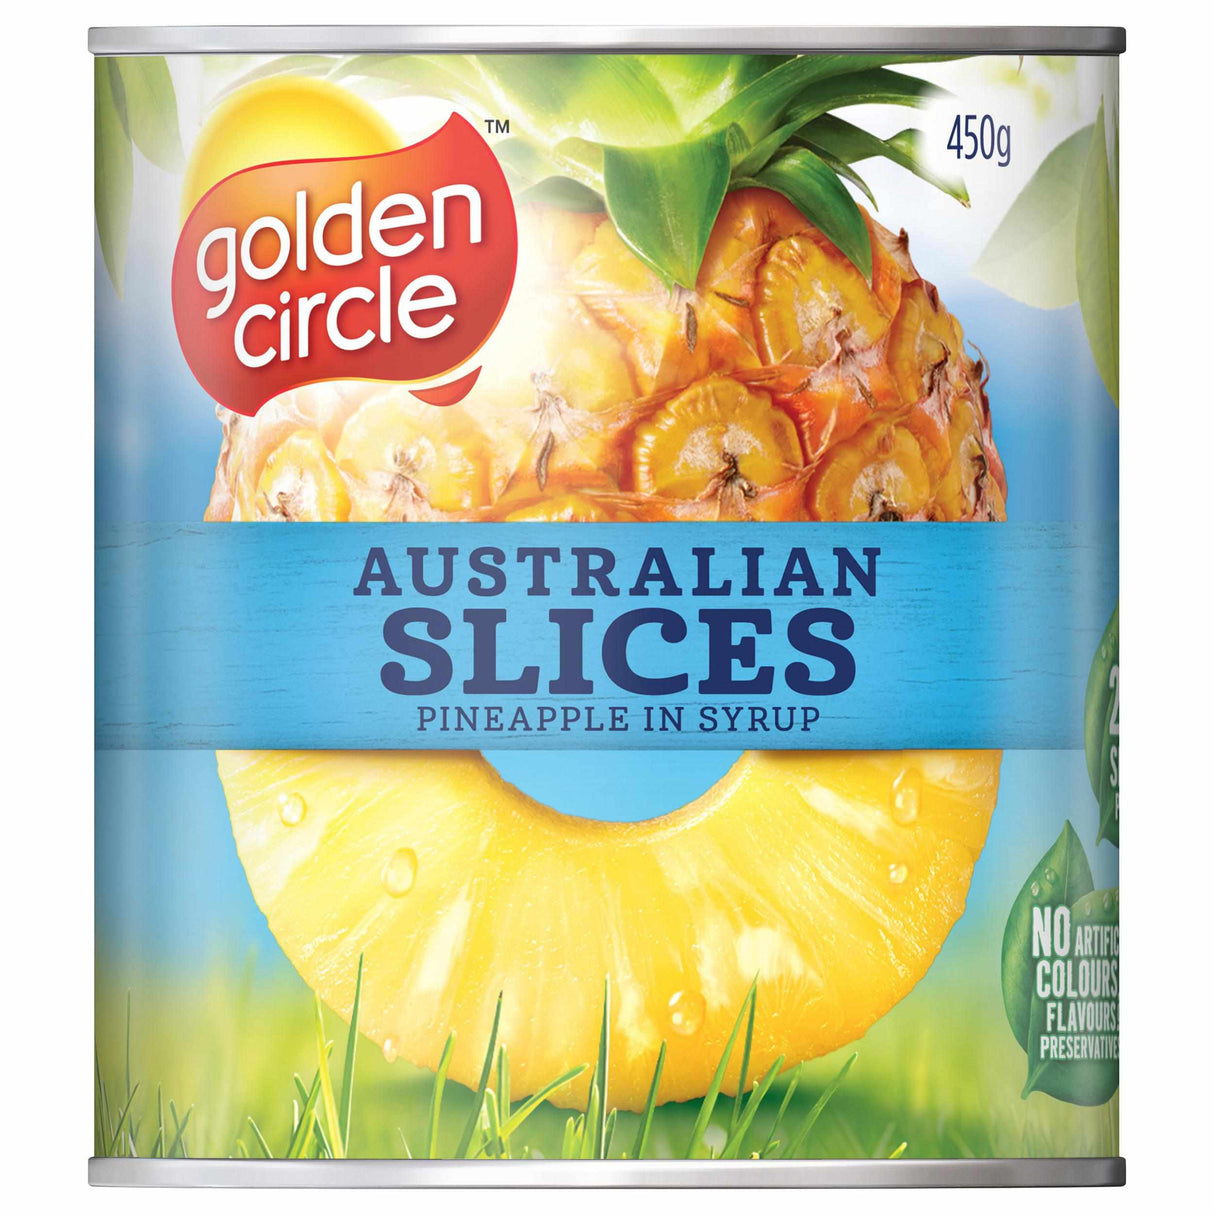 Golden Circle Pineapple Slices in Syrup 450g